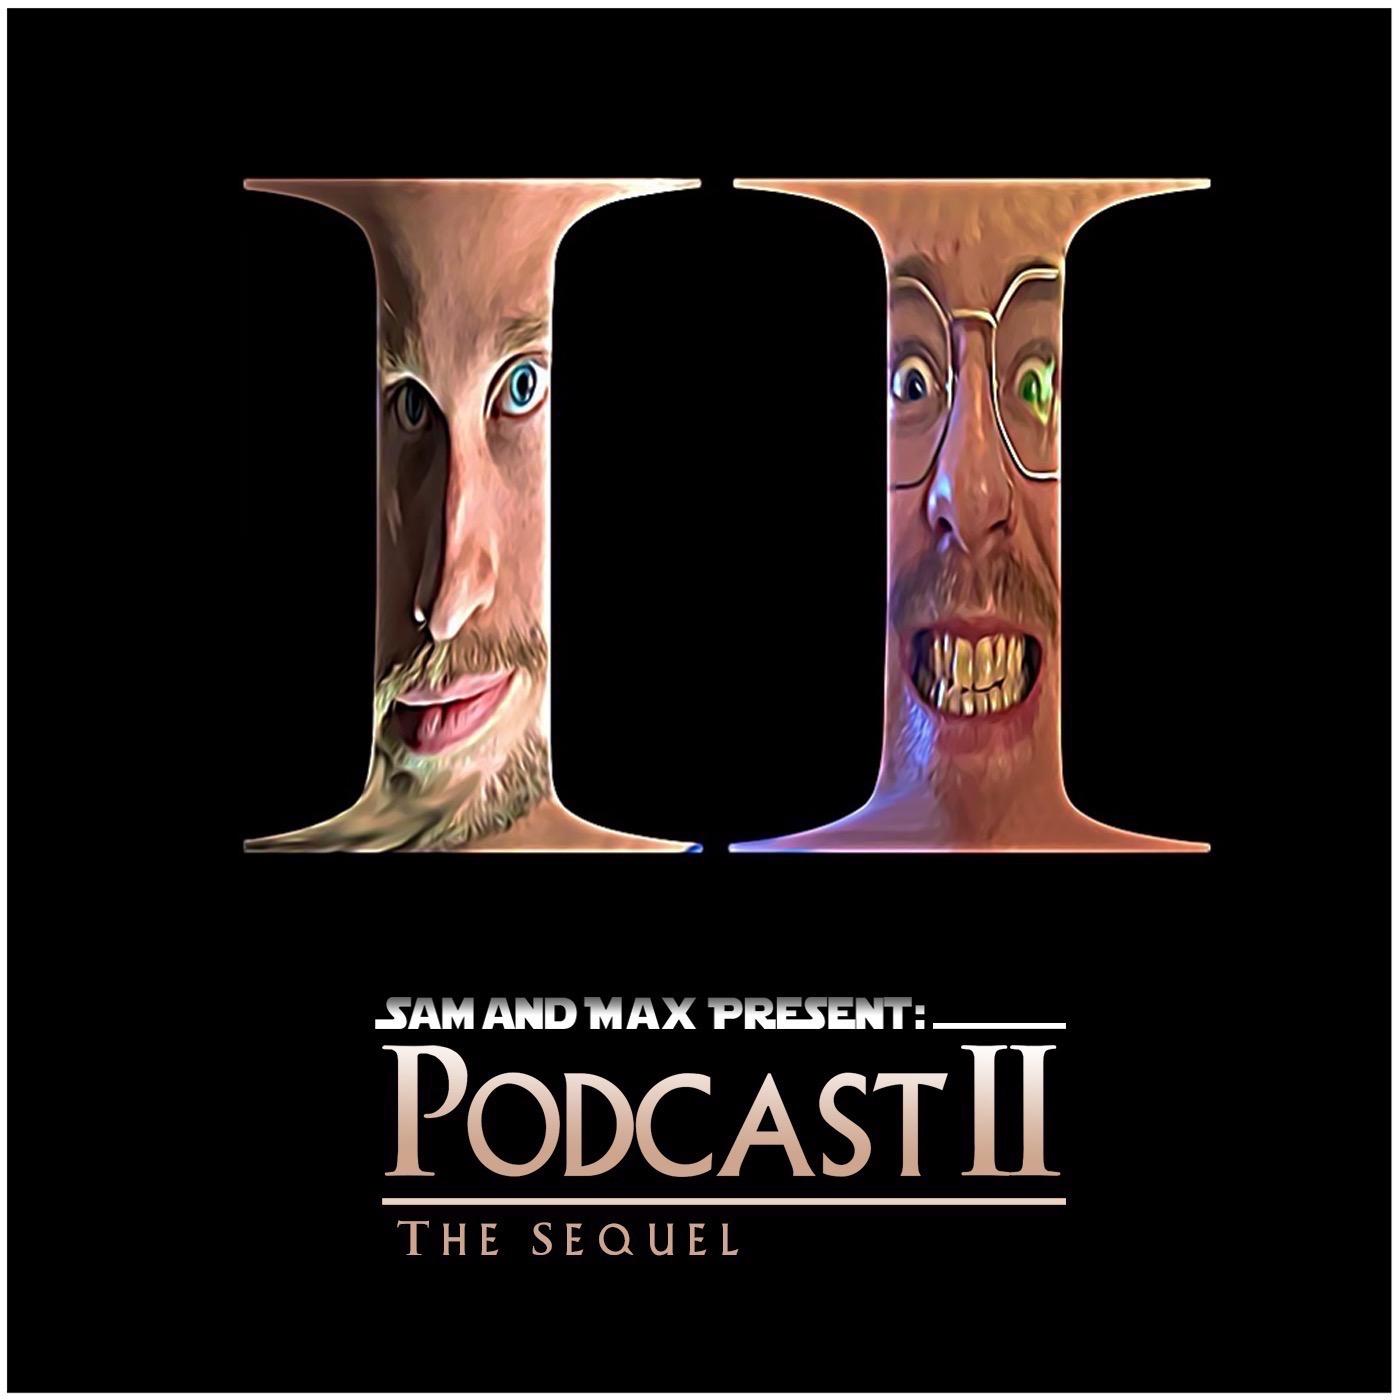 Podcast 2: The Sequel